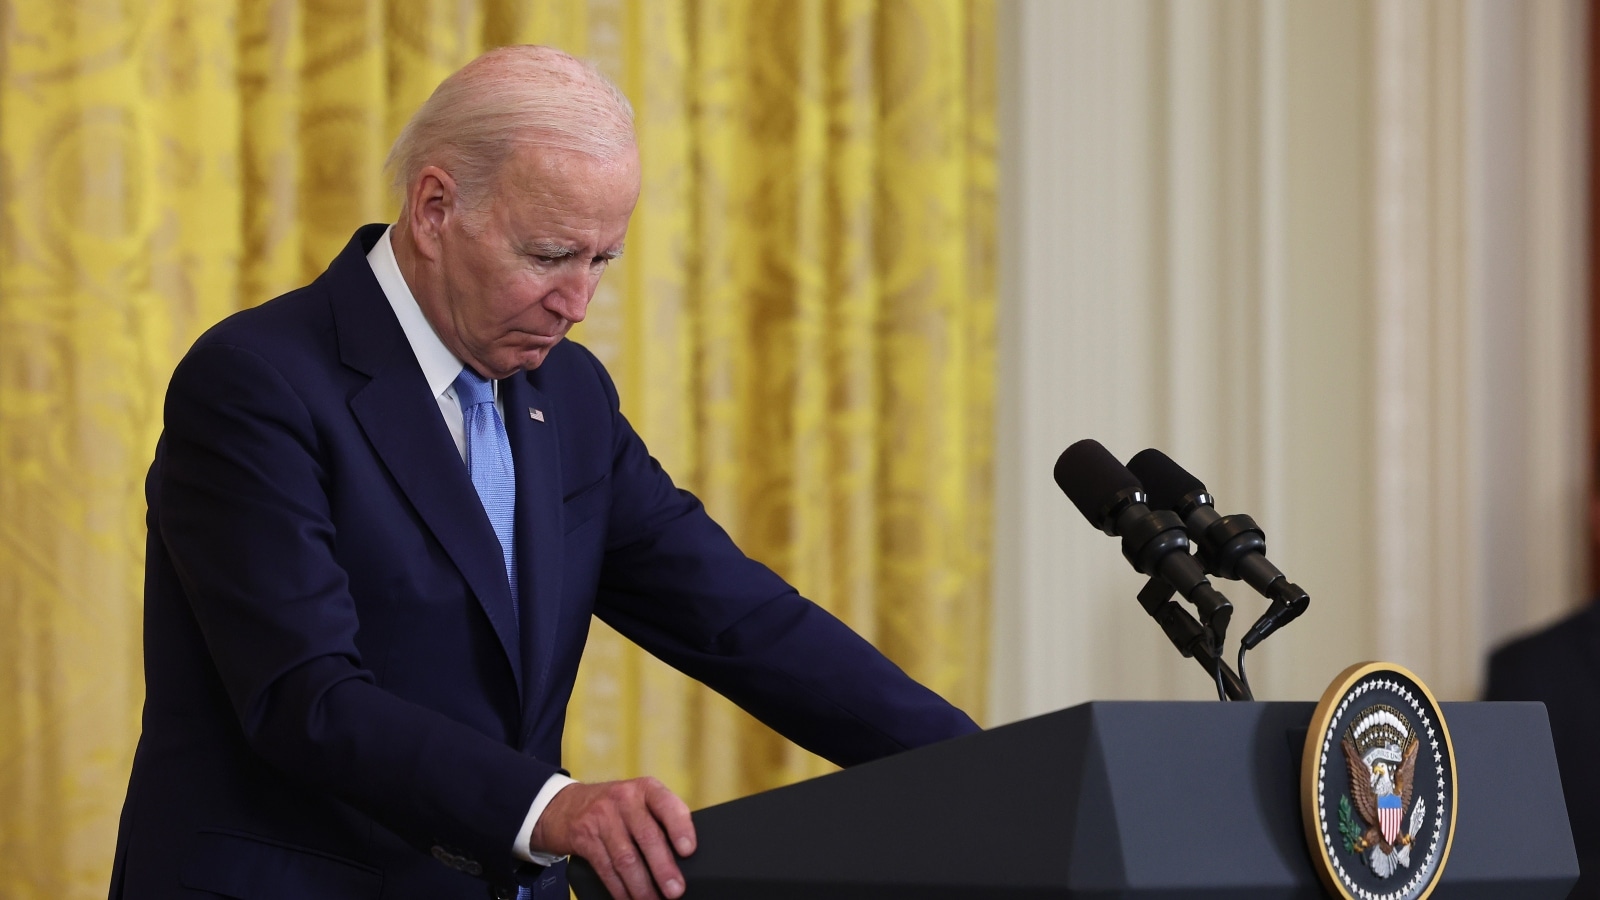 'Americans Must Demand It' - New Evidence From President Joe Biden's Past Surfaces Amid Calls For Impeachment, 'Indictment'